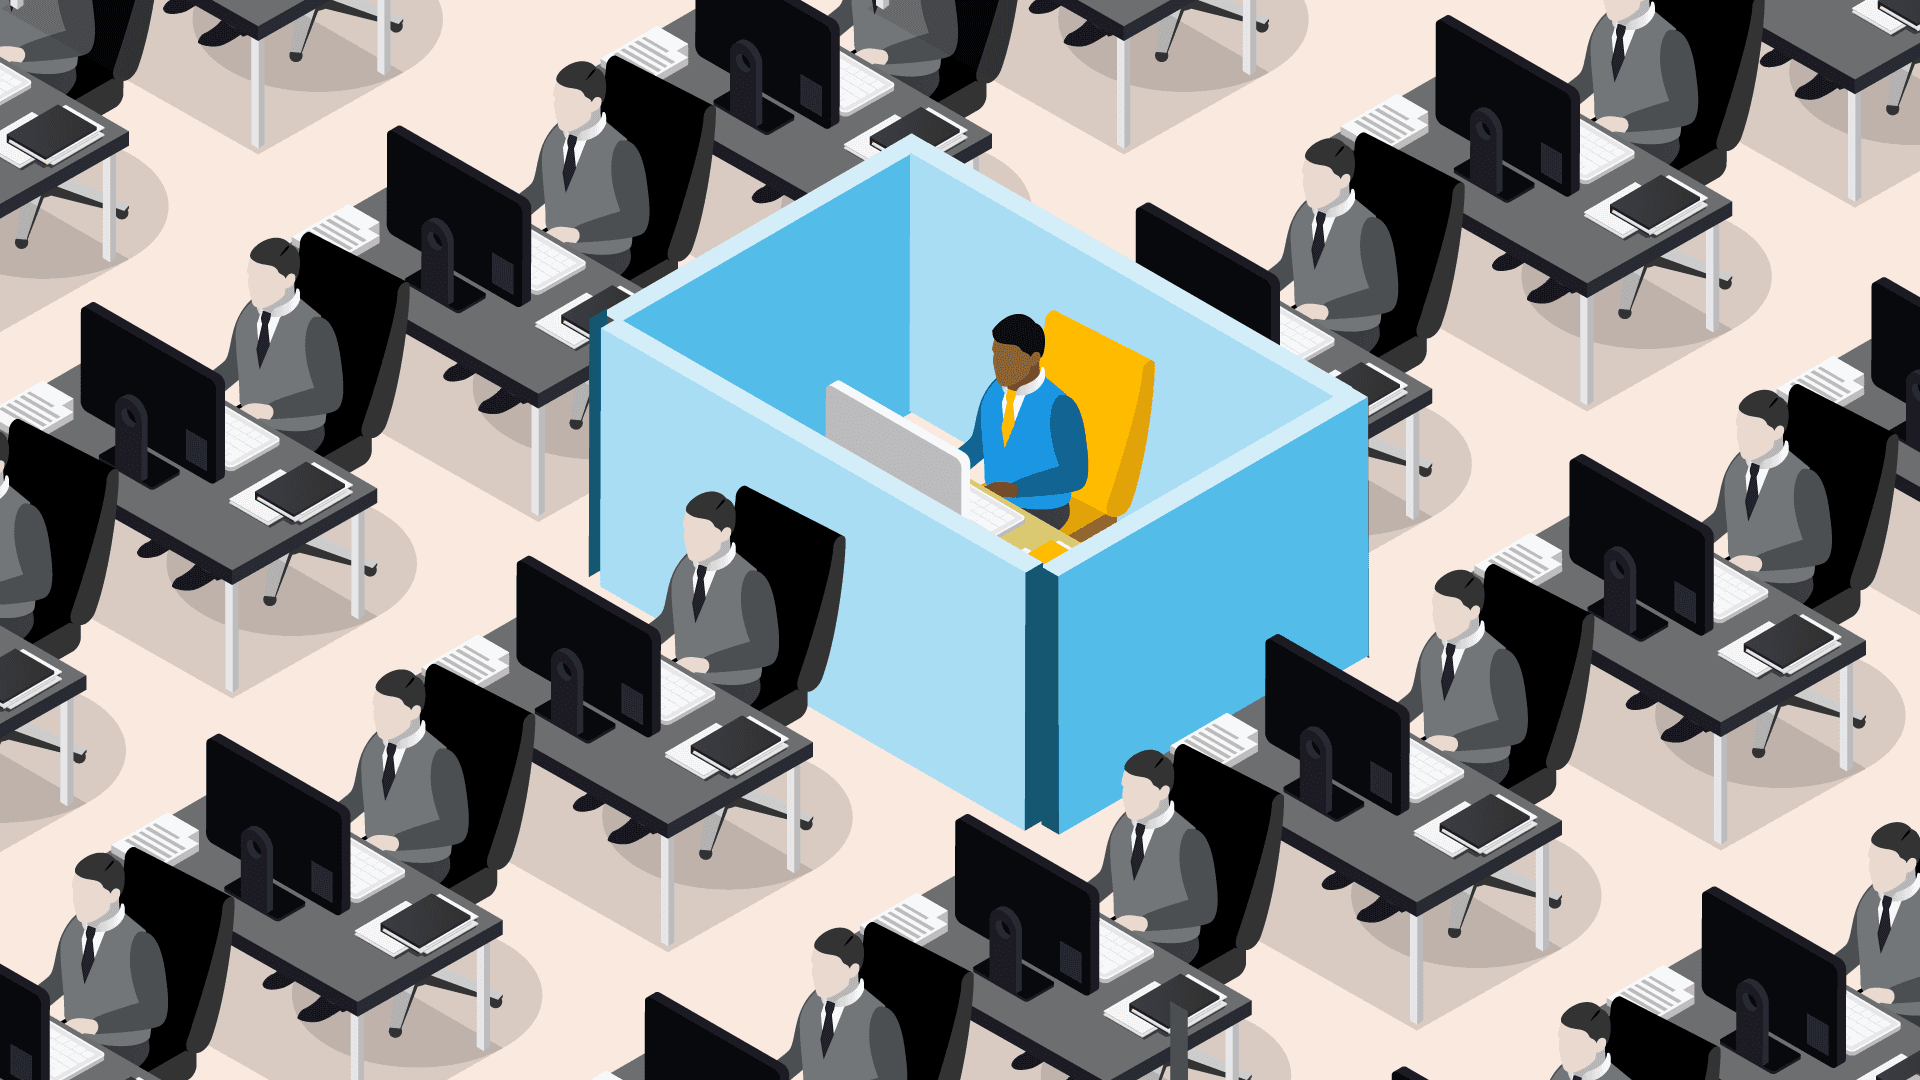 Illustration of man in isolated cubicle